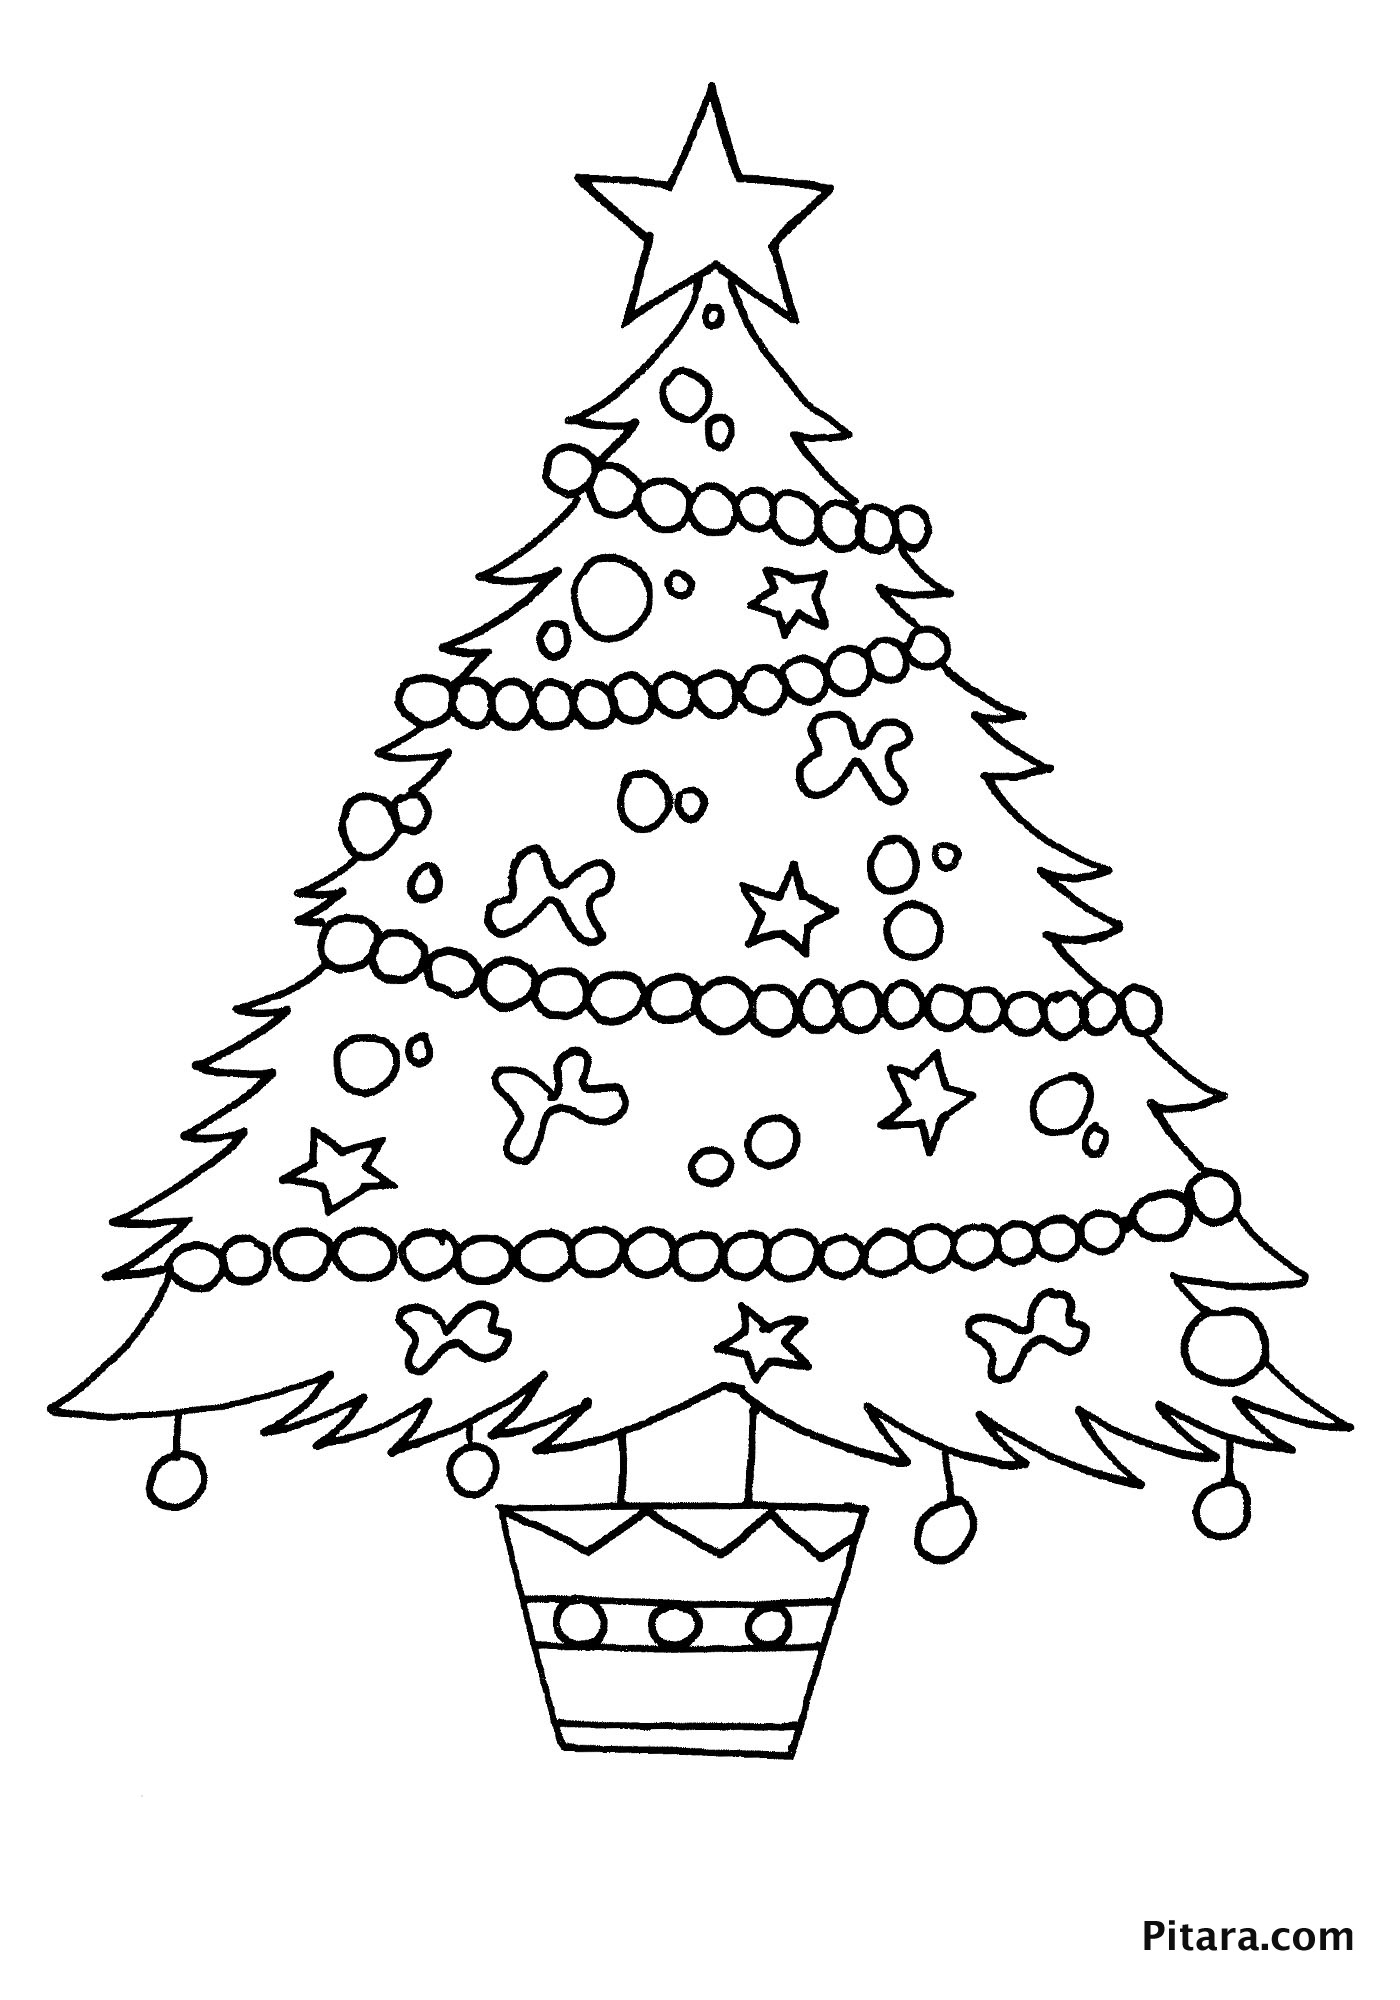 Christmas Coloring Pages for Kids | Pitara Kids Network